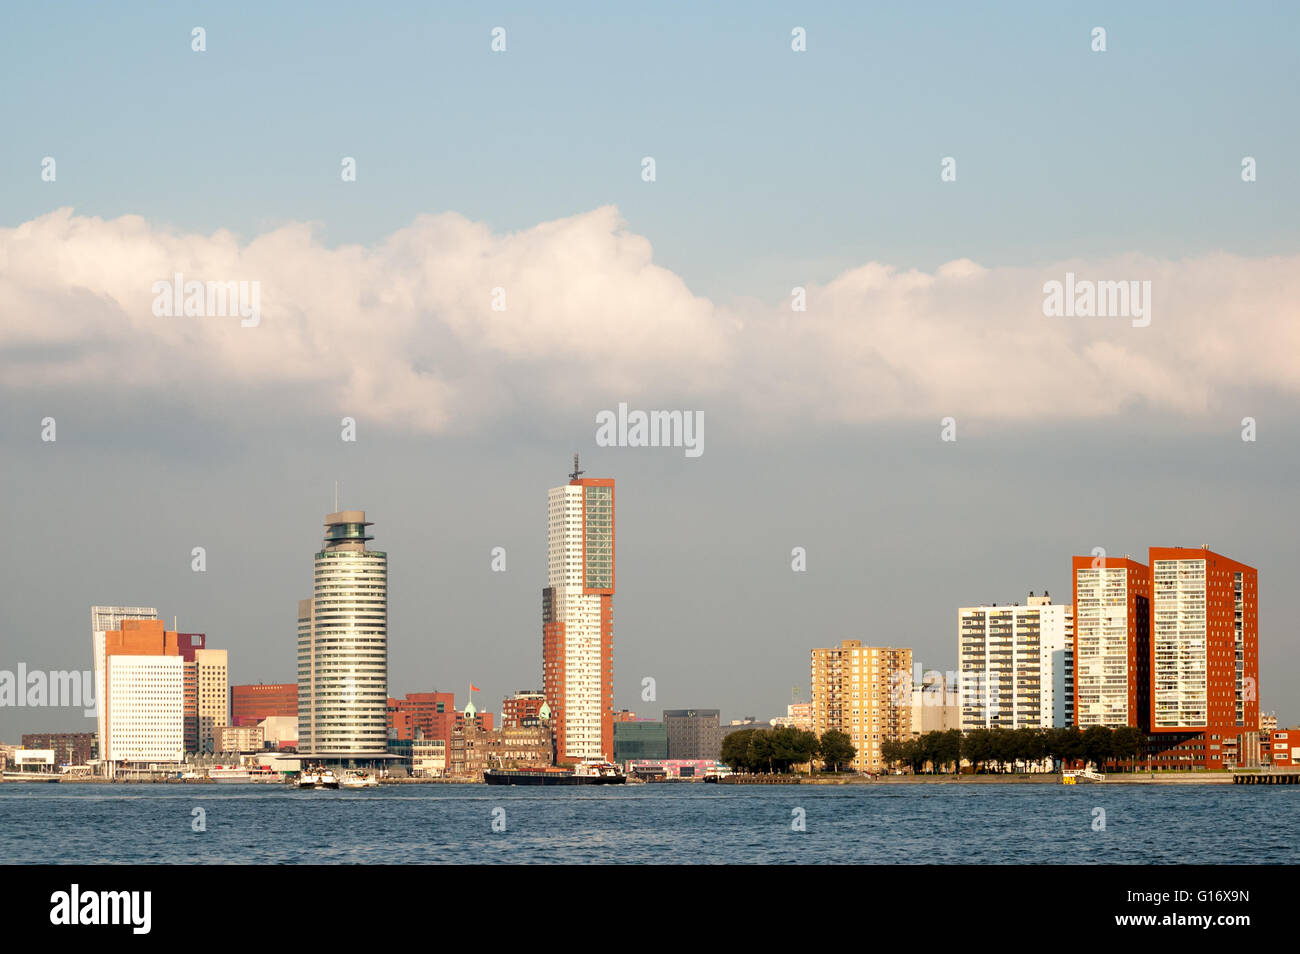 Skyline of Rotterdam from Meuse River with Kop van Zuid, Hotel New York, Katendrecht highrise, South Holland, Netherlands Stock Photo